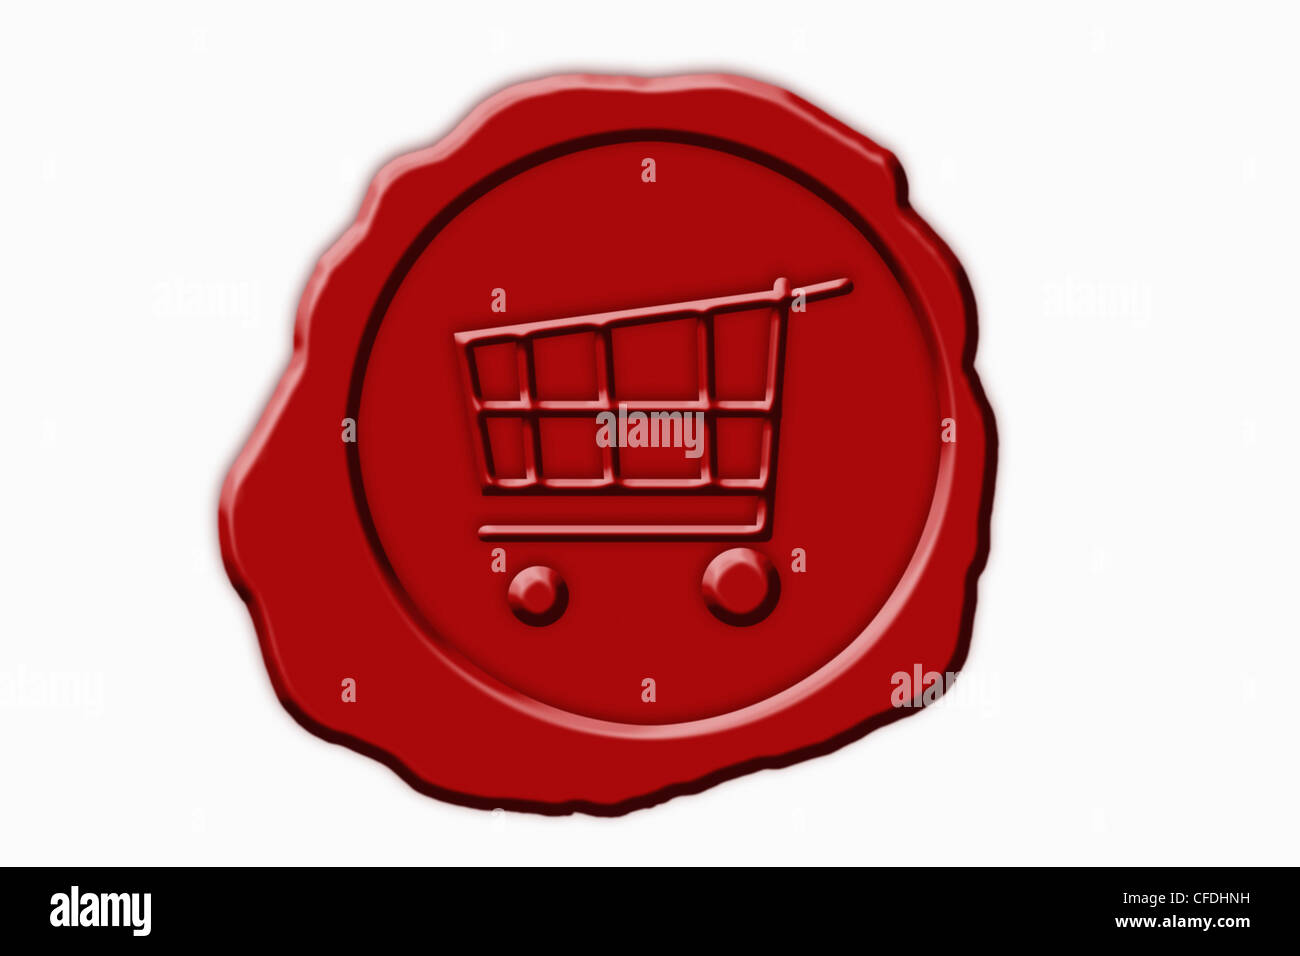 Detail photo of a red seal with a shopping cart Symbol in the middle Stock Photo